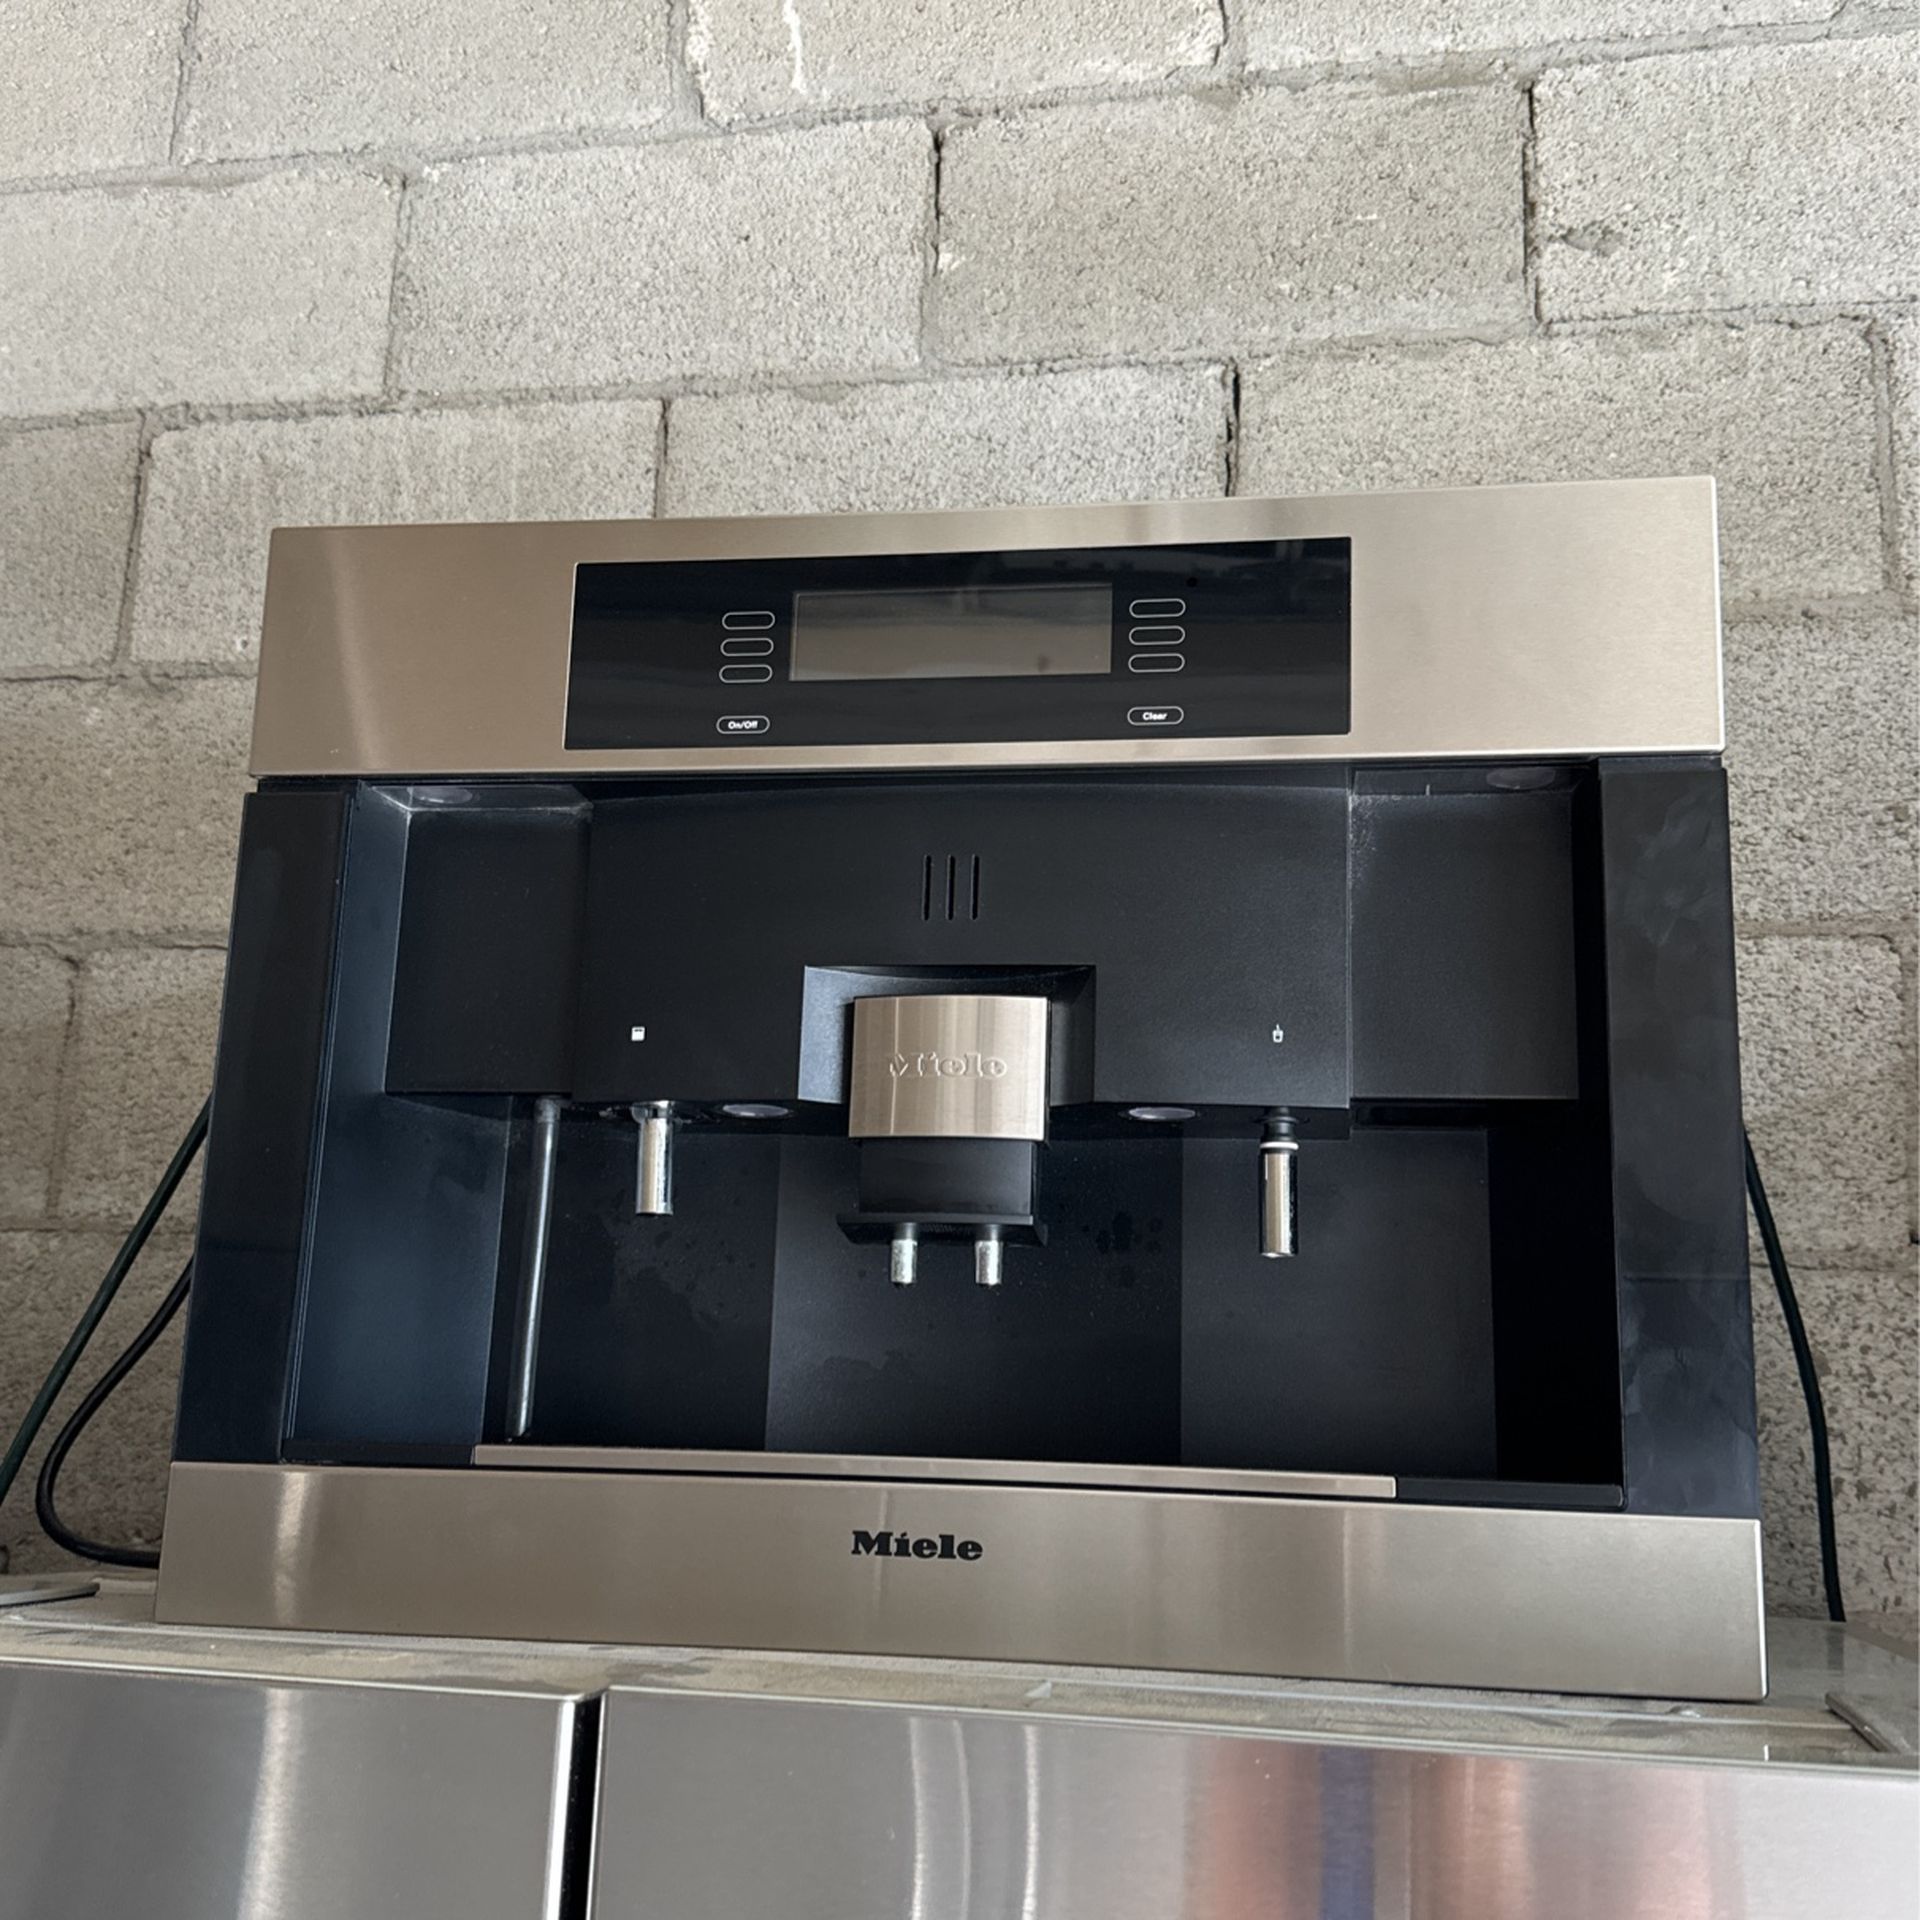 MIELE COFFEE MAKER 24” INCHES 